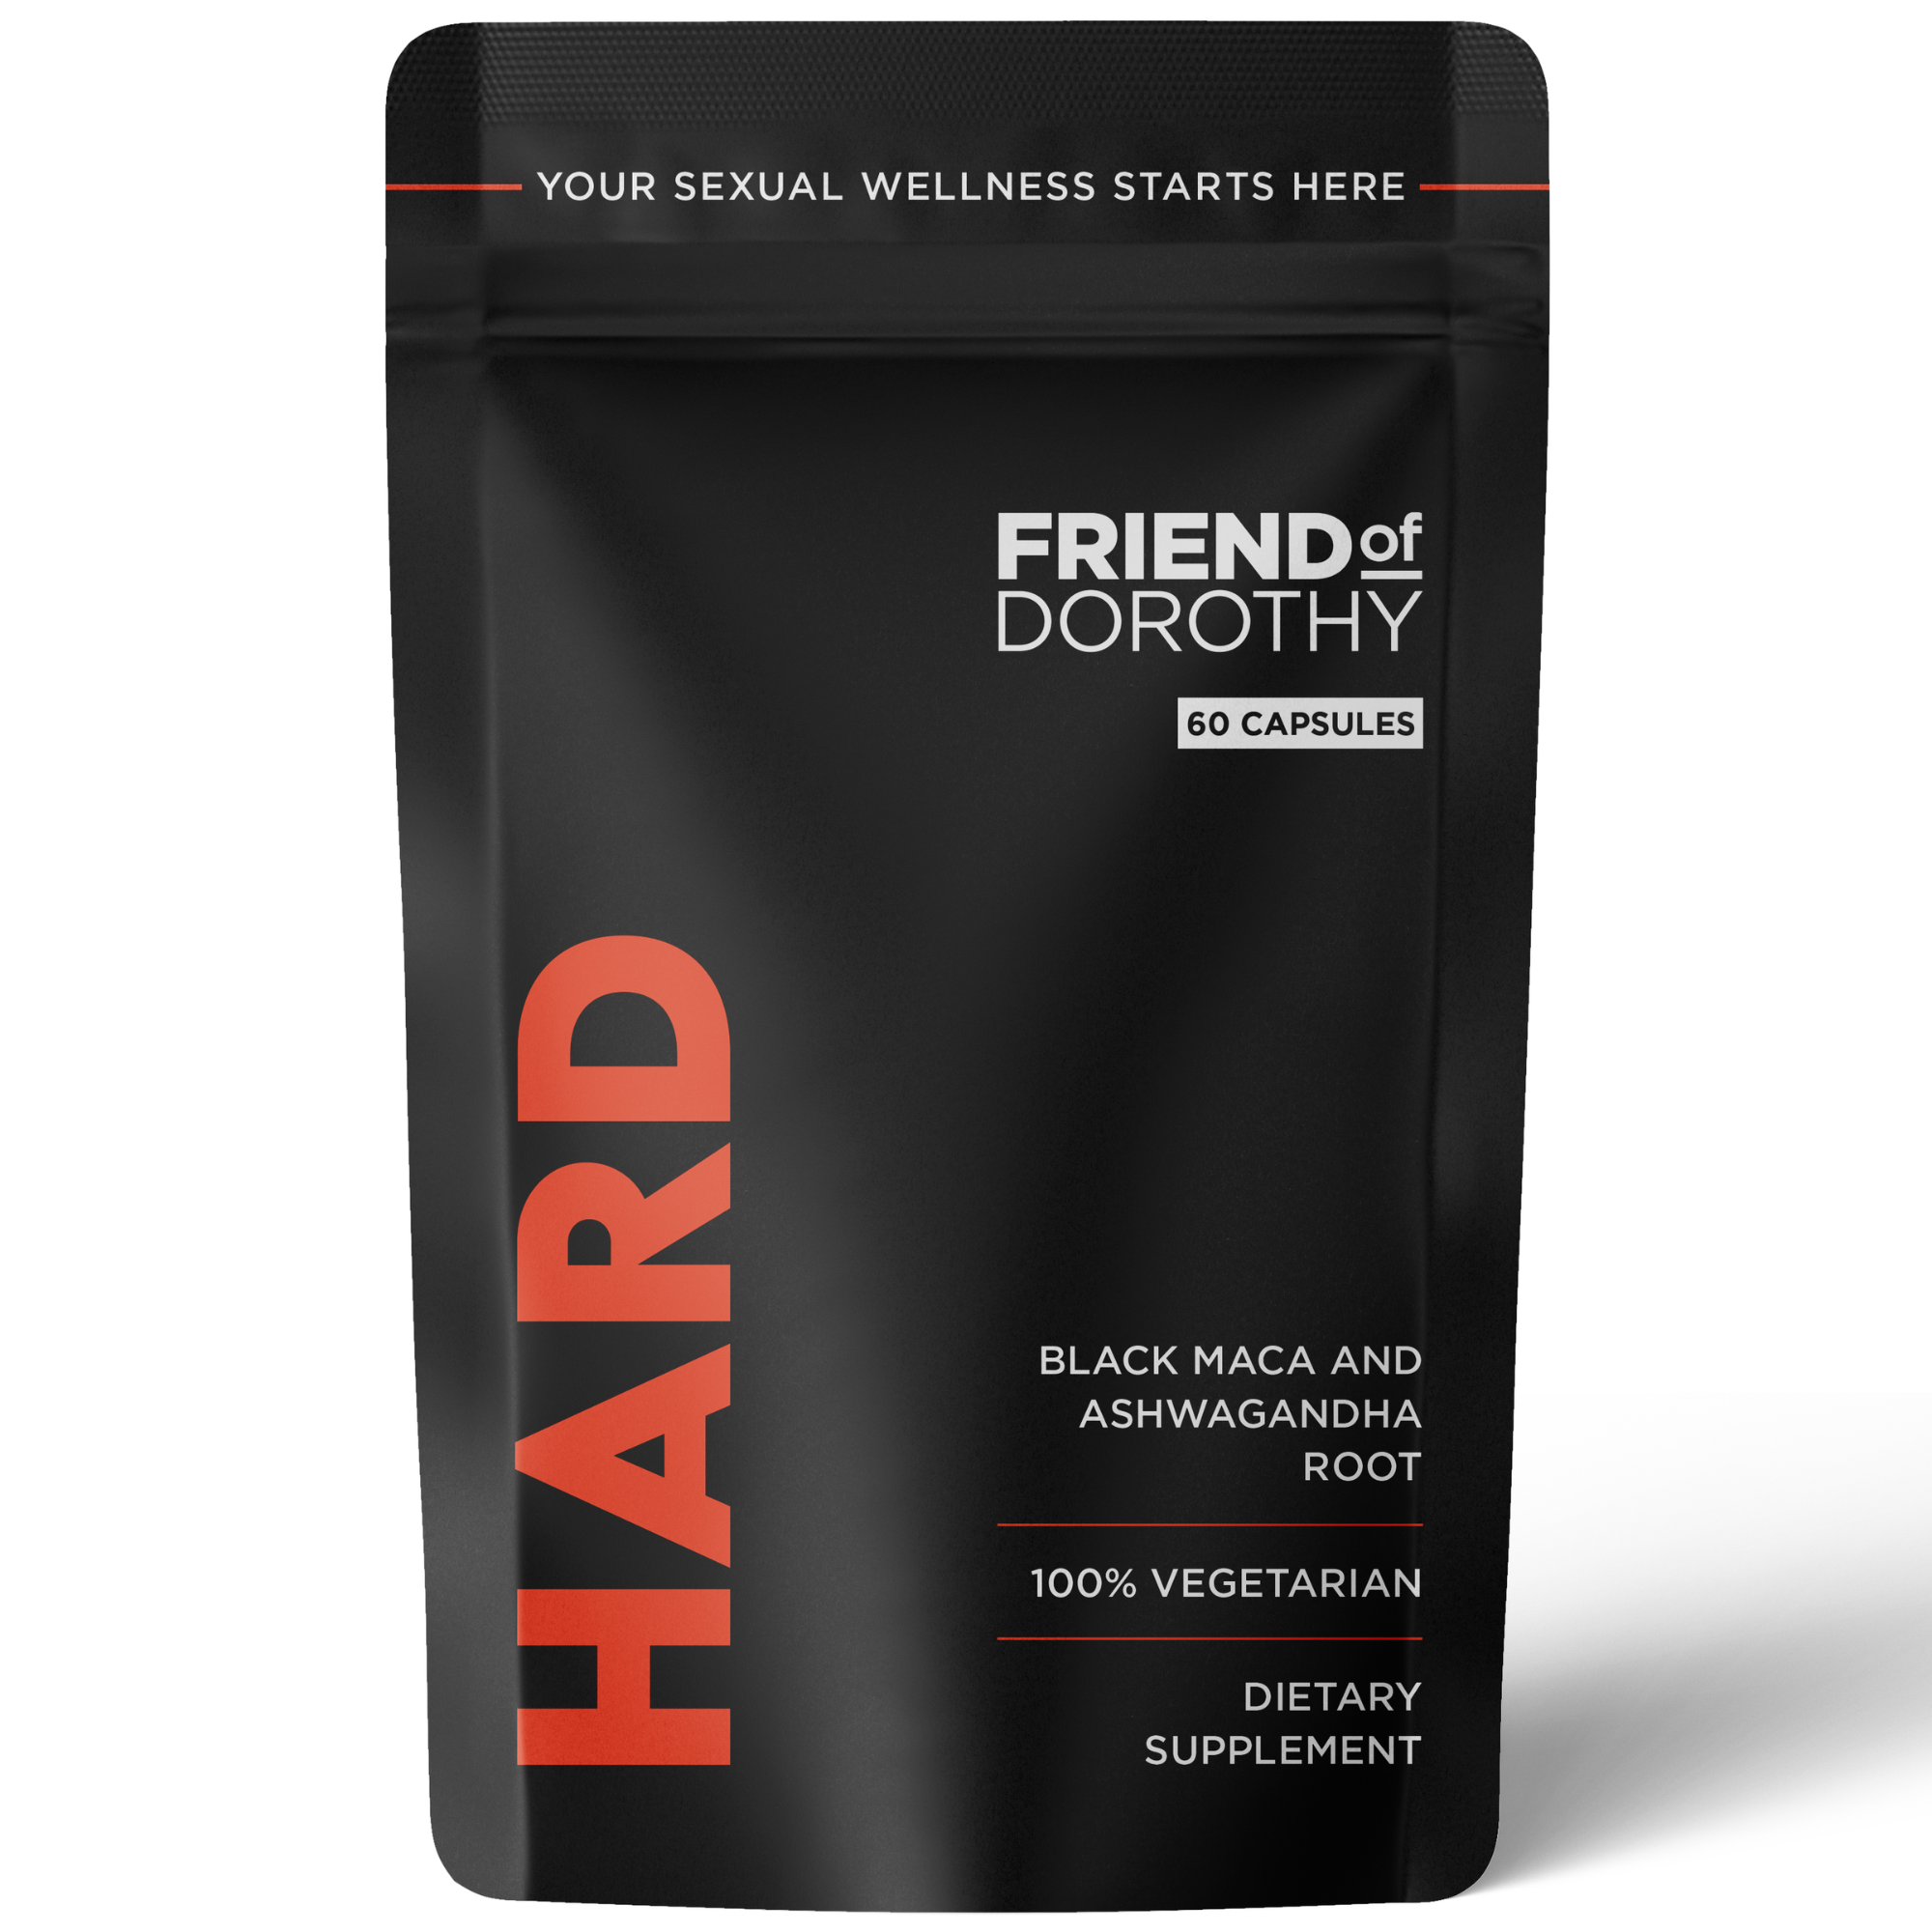 HARD - boost your libido, get hard & stay hard (1 month supply)